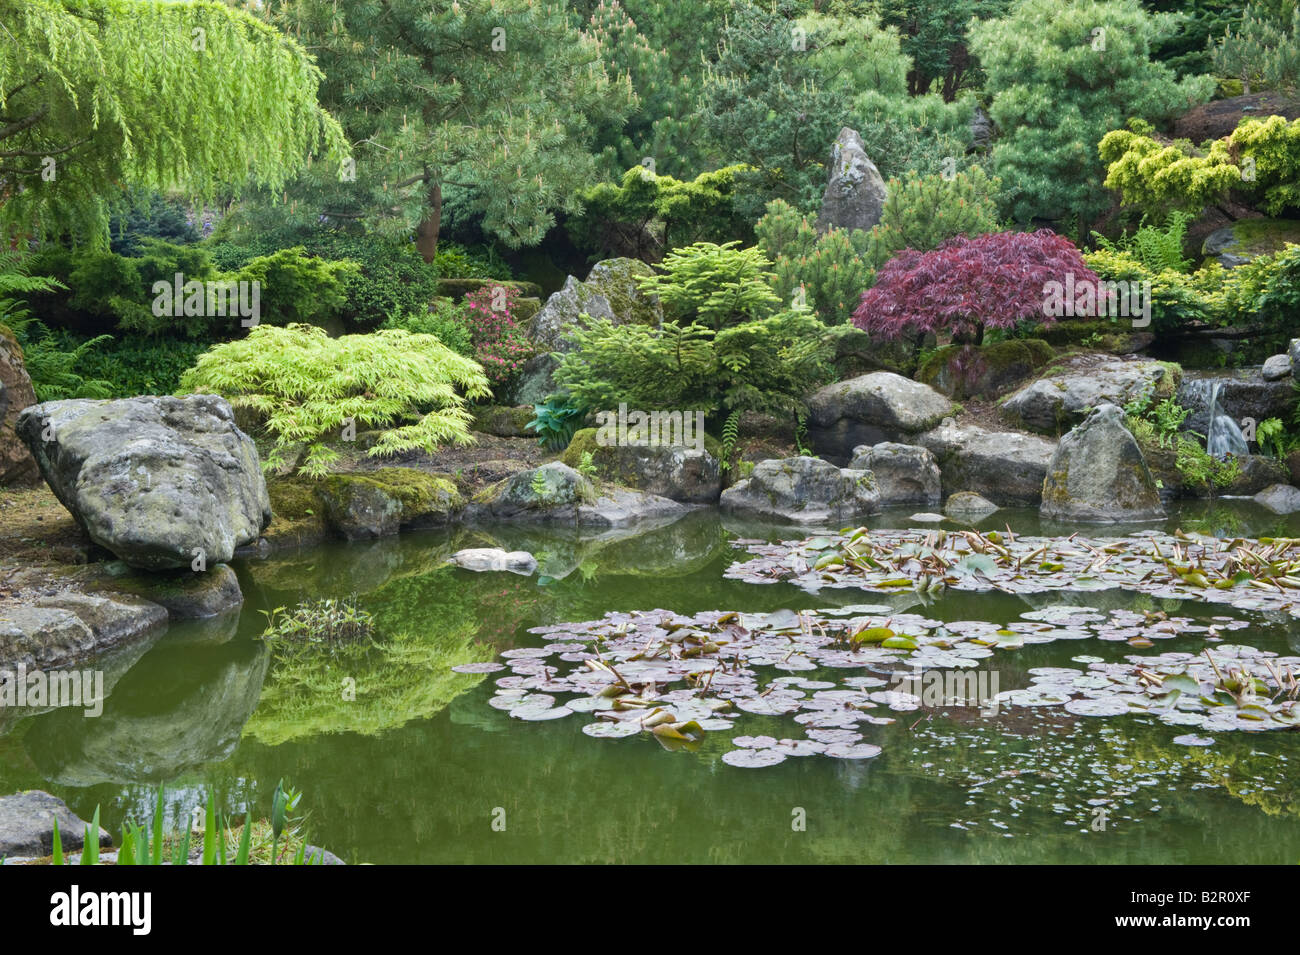 Garden pond with rocks, water lilies and trees in garden design by Bahaa Seedhom North Yorkshire England May Stock Photo